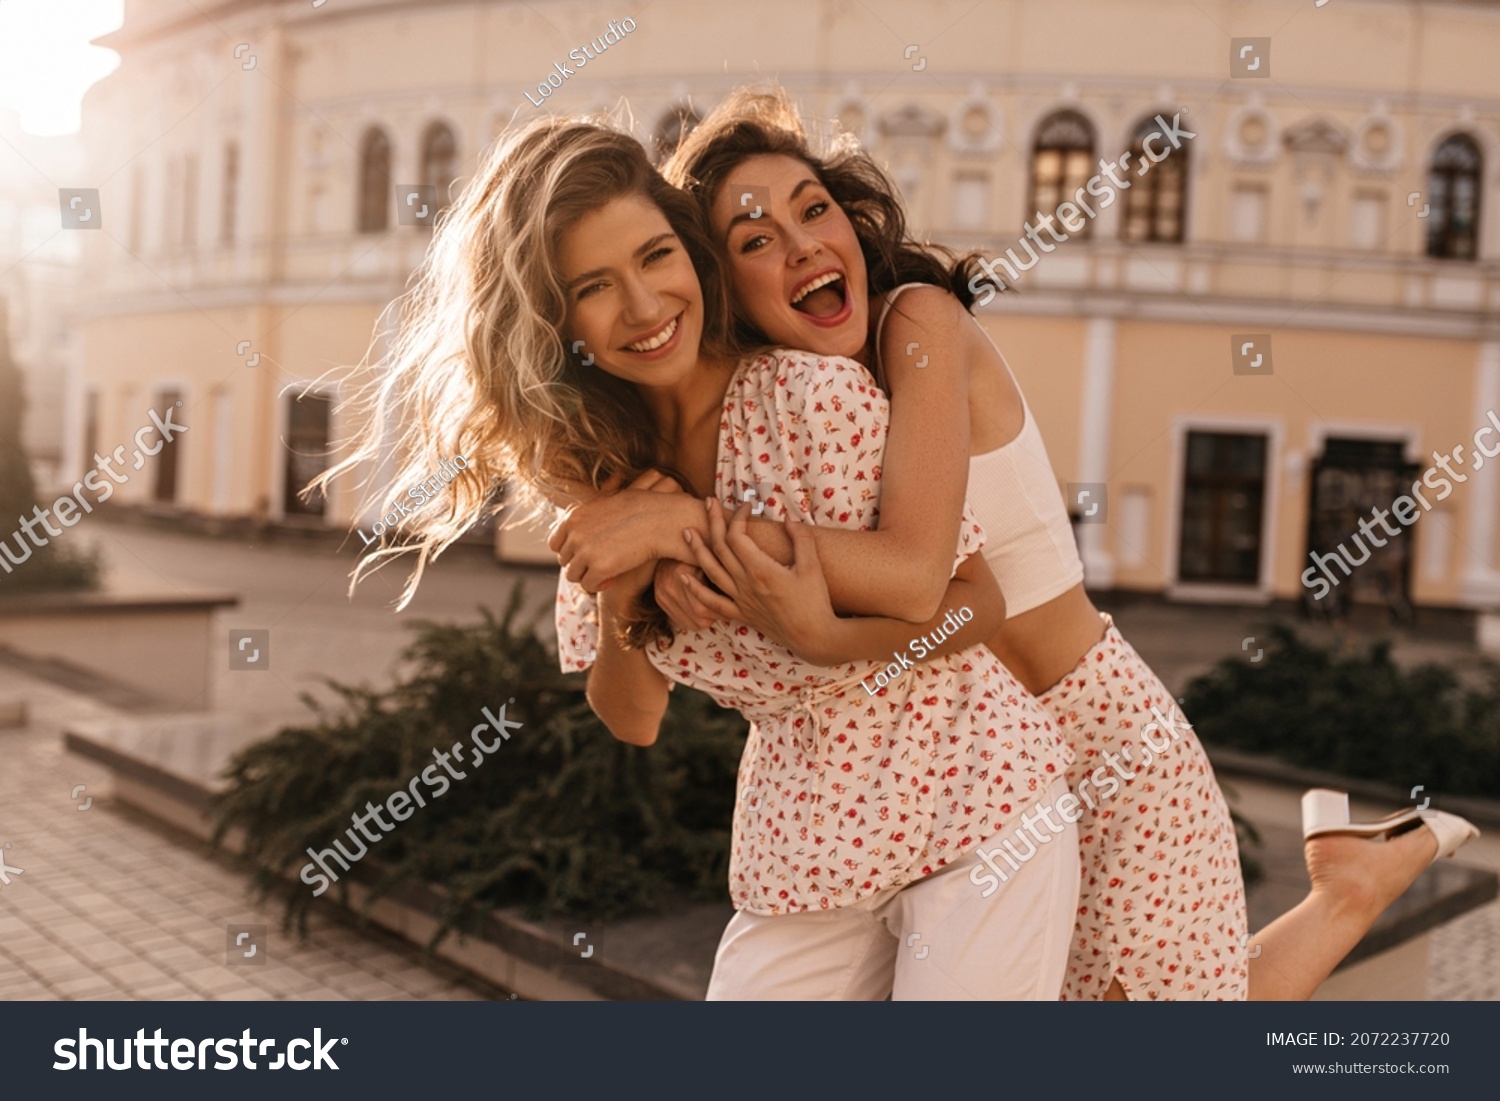 Caucasian young woman brunette hung on back of her friend against the open background of city. Girls are smiling broadly with their teeth at camera, dressed in white outfits. #2072237720